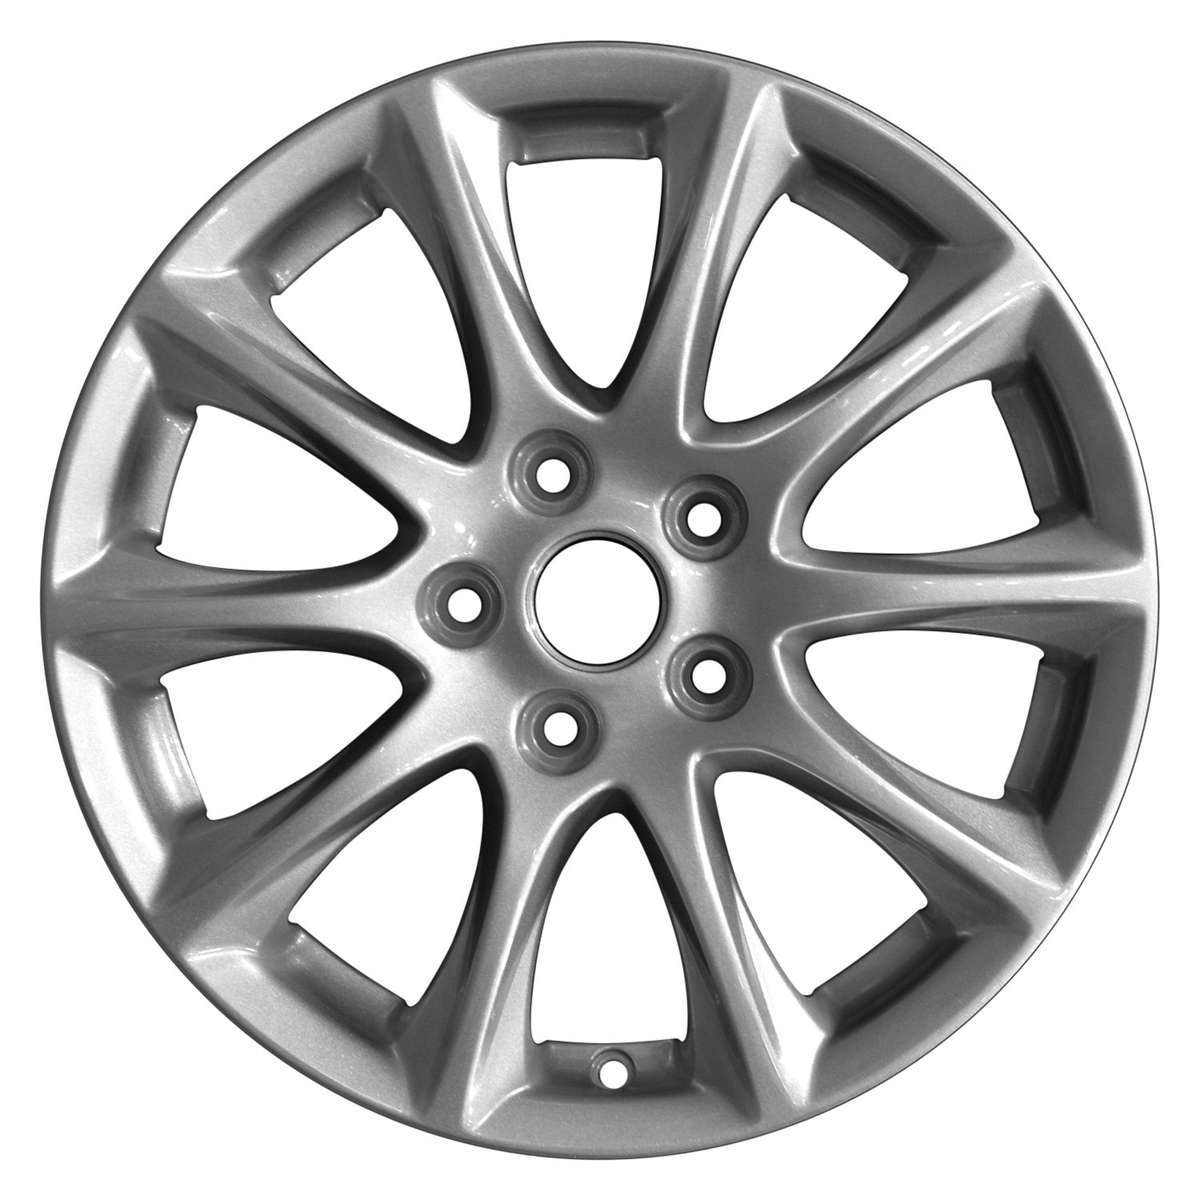 2017 Ford Fusion New 16" Replacement Wheel Rim RW3983S